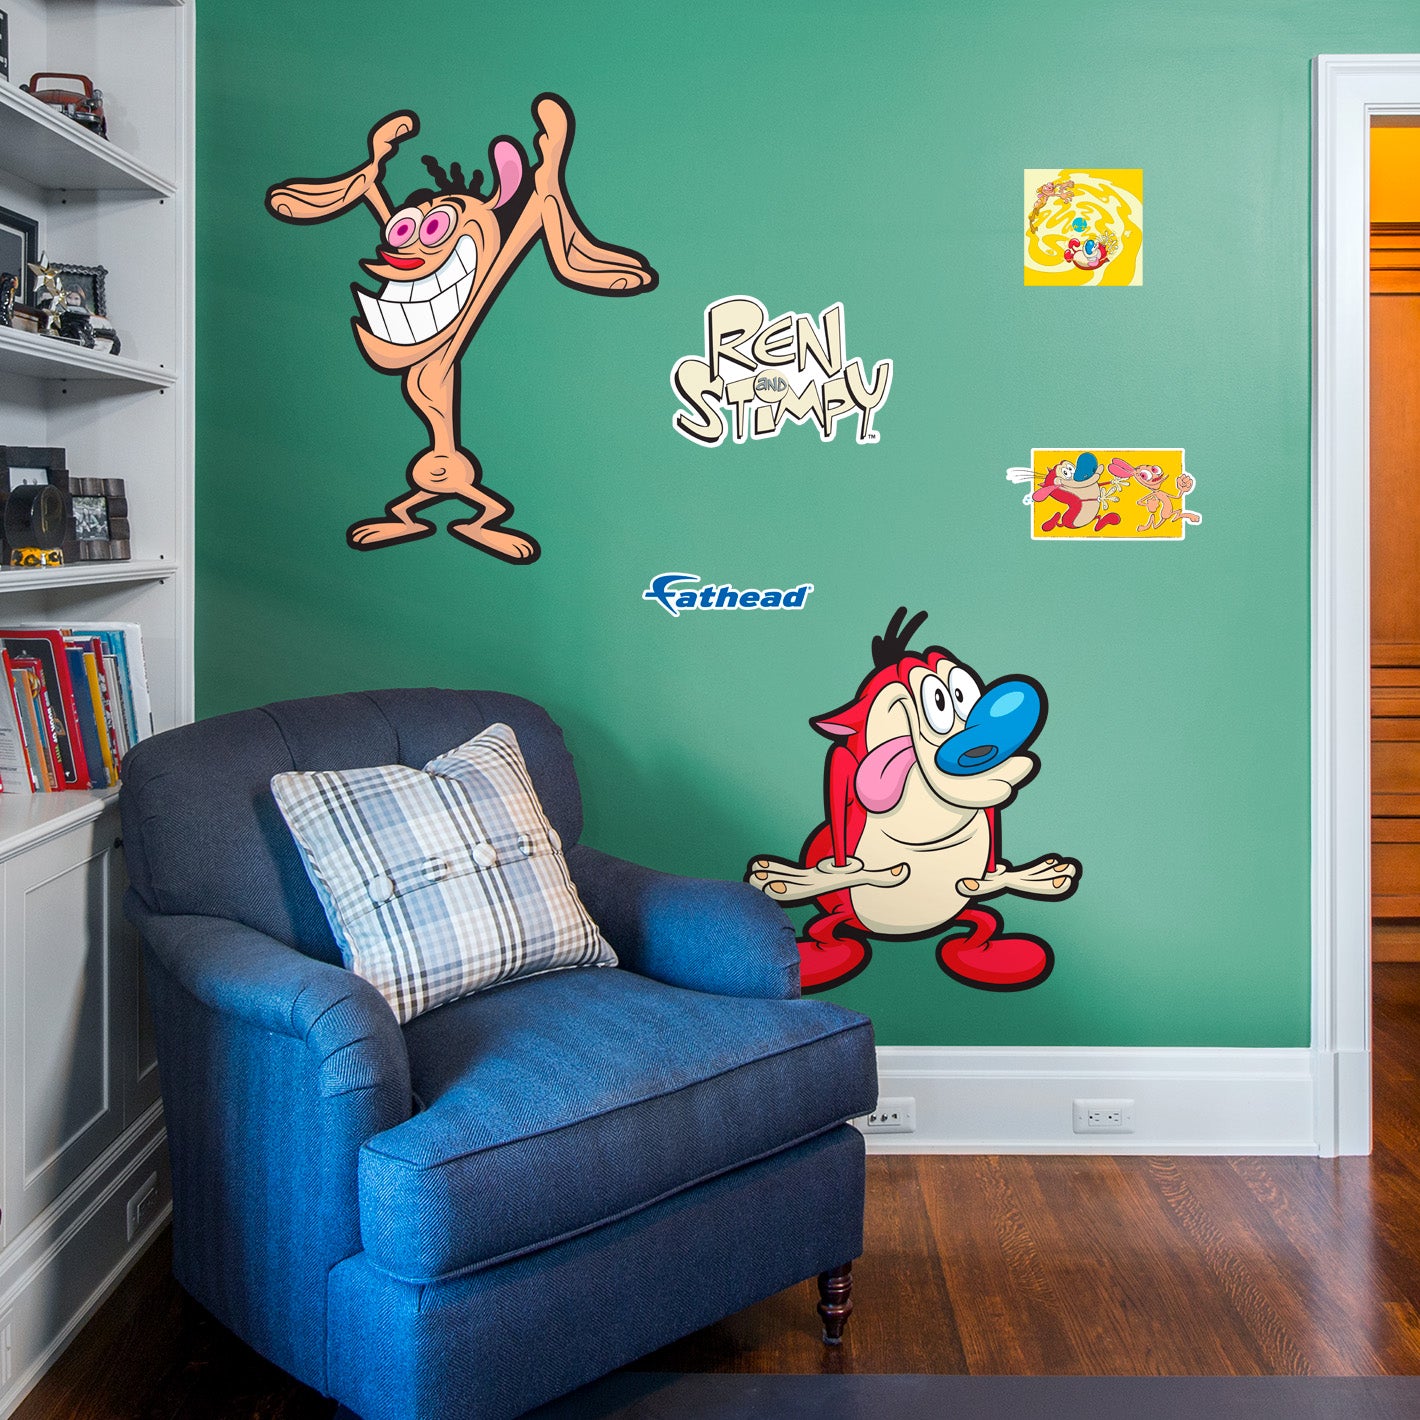 Life-Size Character +5 Decals  (54"W x 80"H) 